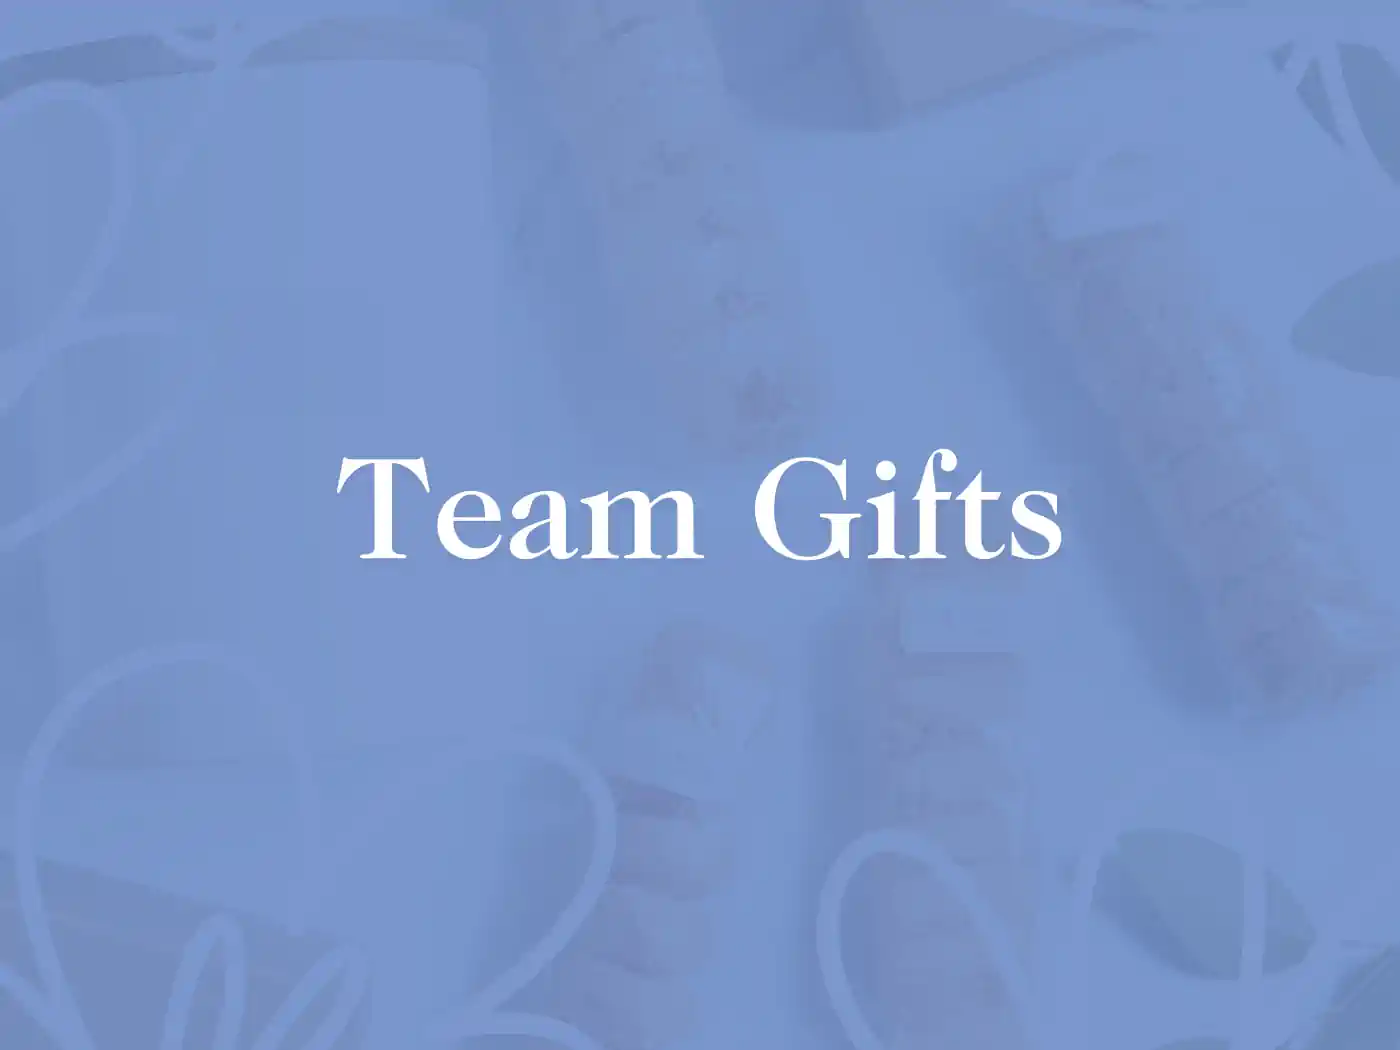 Promotional background with a soft blue hue and the words 'Team Gifts' prominently displayed, overlaid on subtle images of gift ribbons and boxes, setting a thematic tone for corporate gifting. Fabulous Flowers and Gifts. Team Gifts. Delivered with Heart.